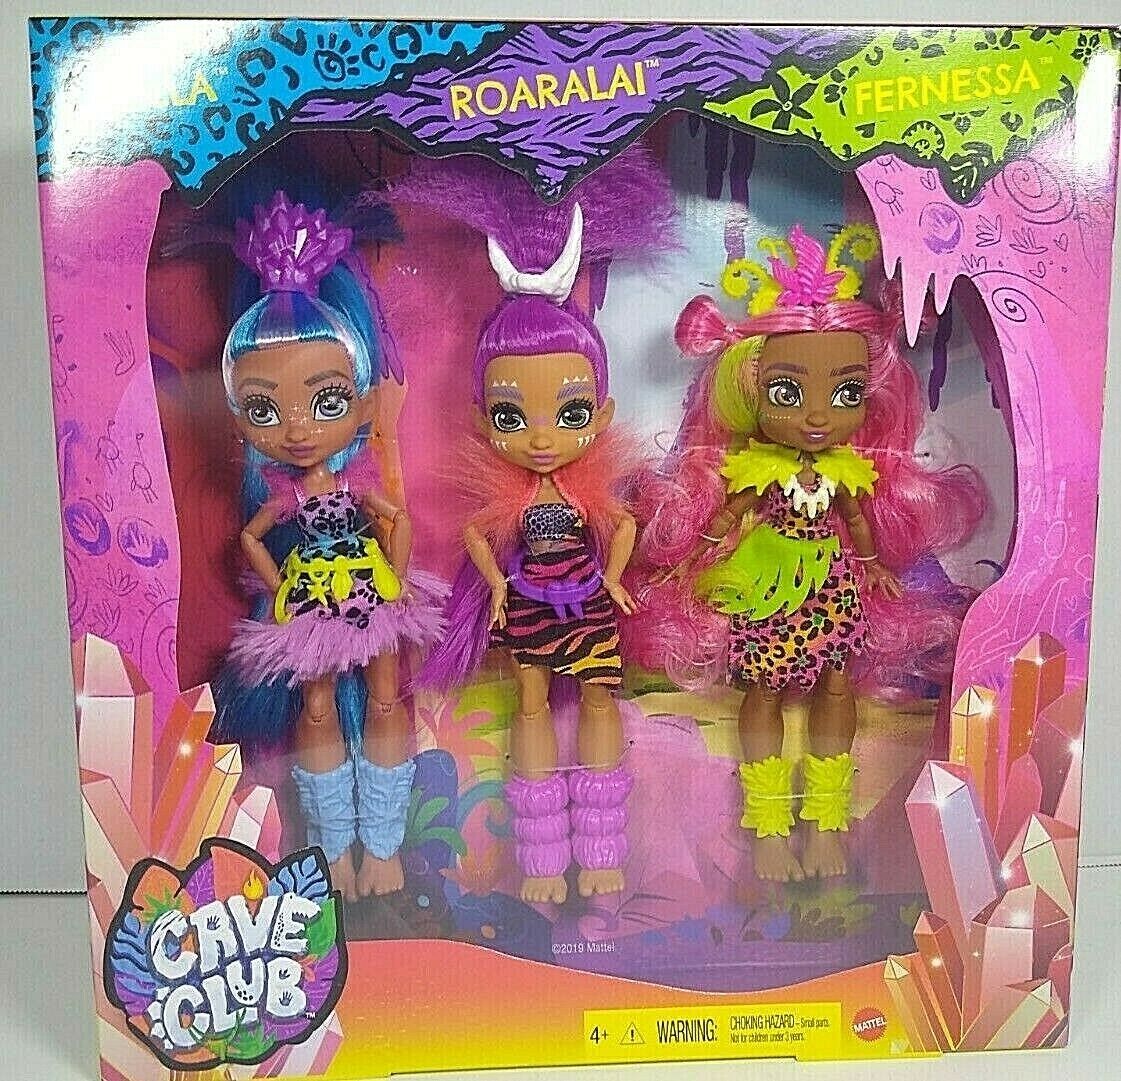 Primary image for CAVE CLUB 3 Pack Of Dolls. TELLA, ROARALAI, FERNESSA - Prehistoric Kids Fashions